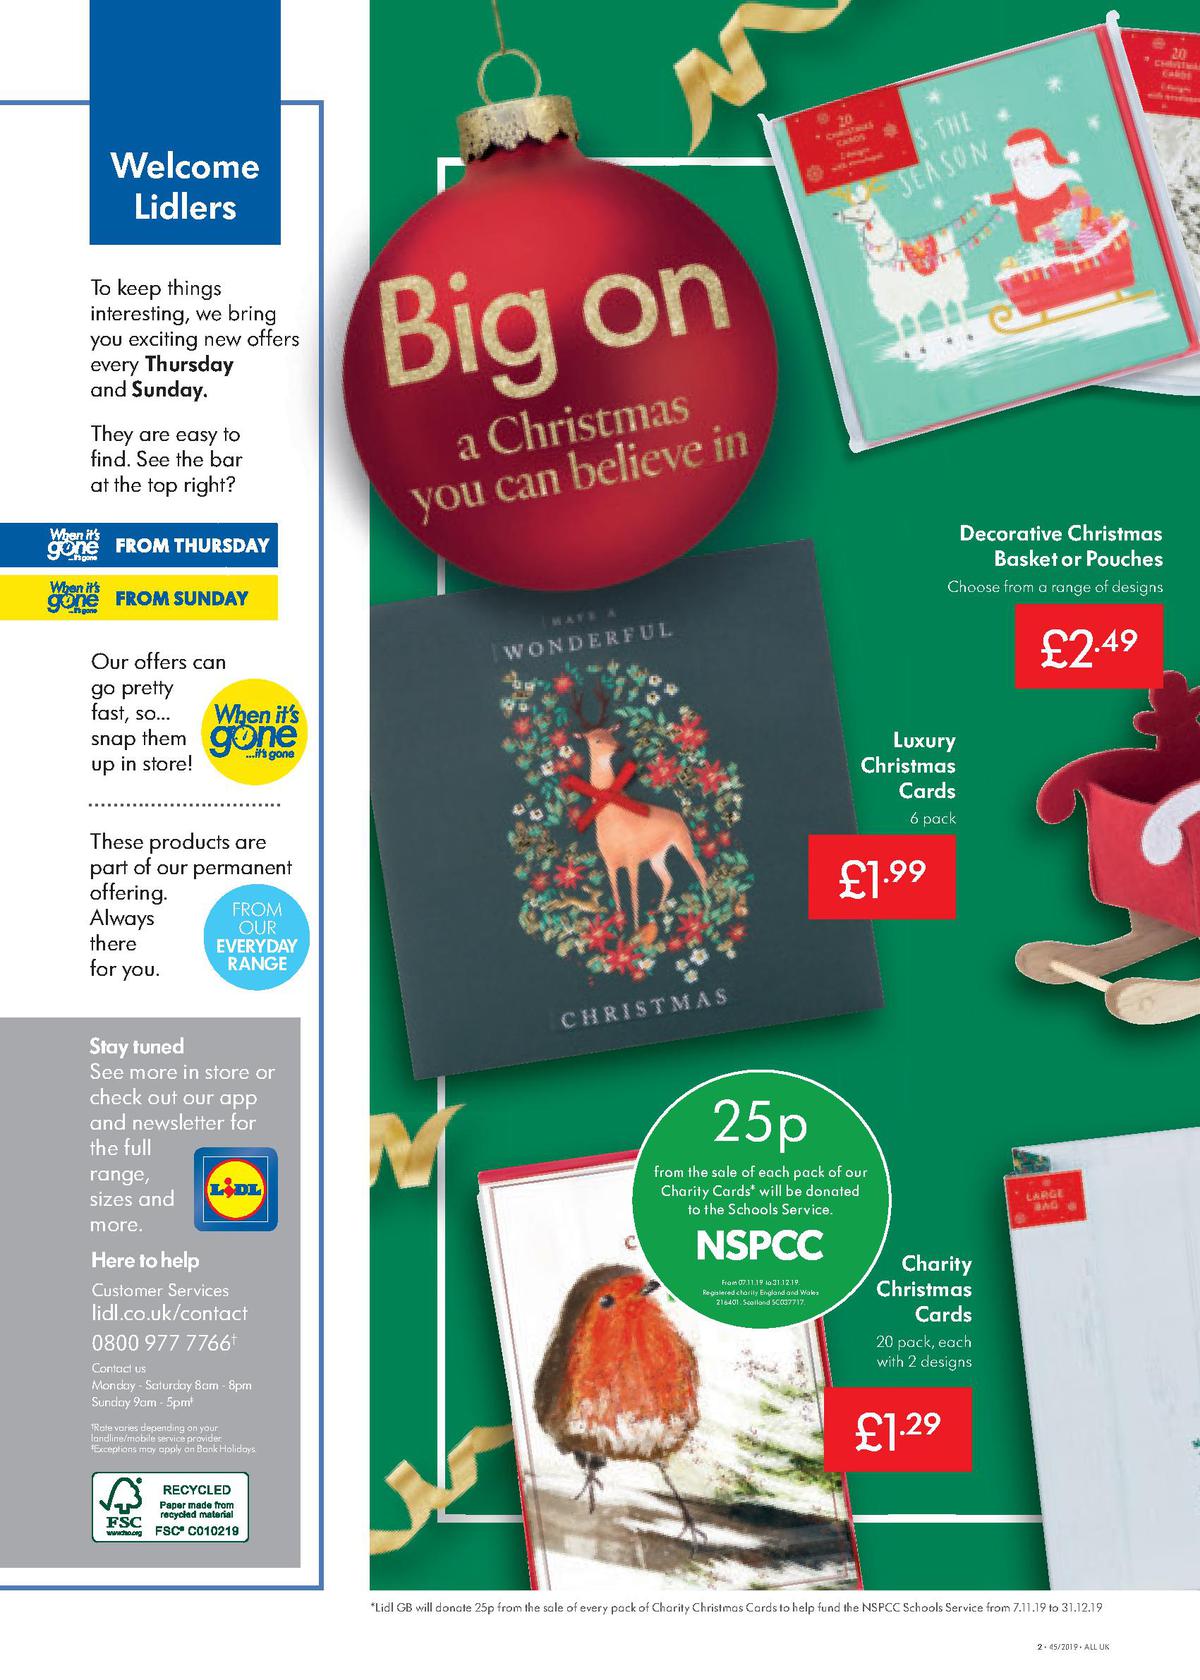 LIDL Offers from 7 November